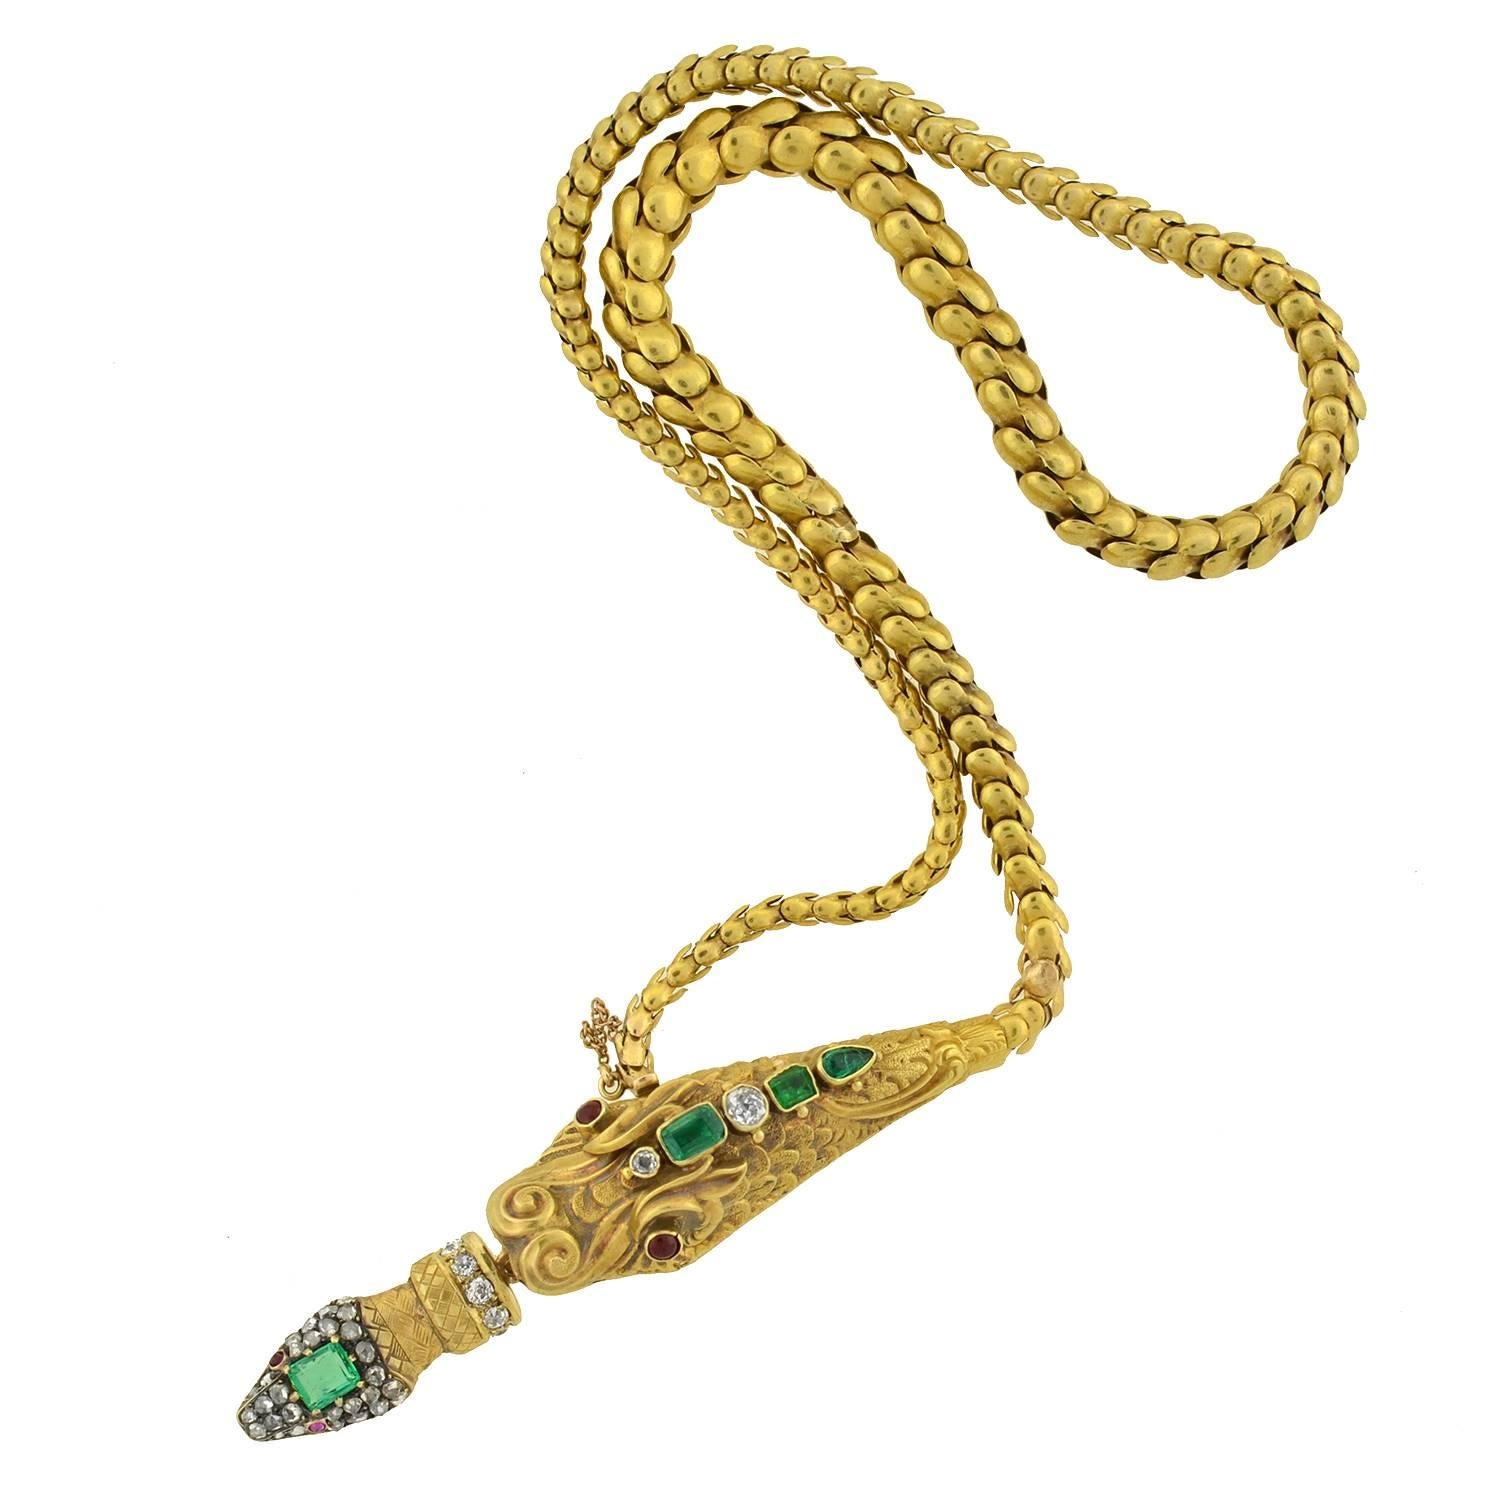 An extraordinary serpentine necklace from the Victorian (ca1880) era! This rare and unusual piece is crafted in 18kt gold and decorated with multiple gemstone accents. An elaborate dragon's head rests at the center, which has an exotic appearance